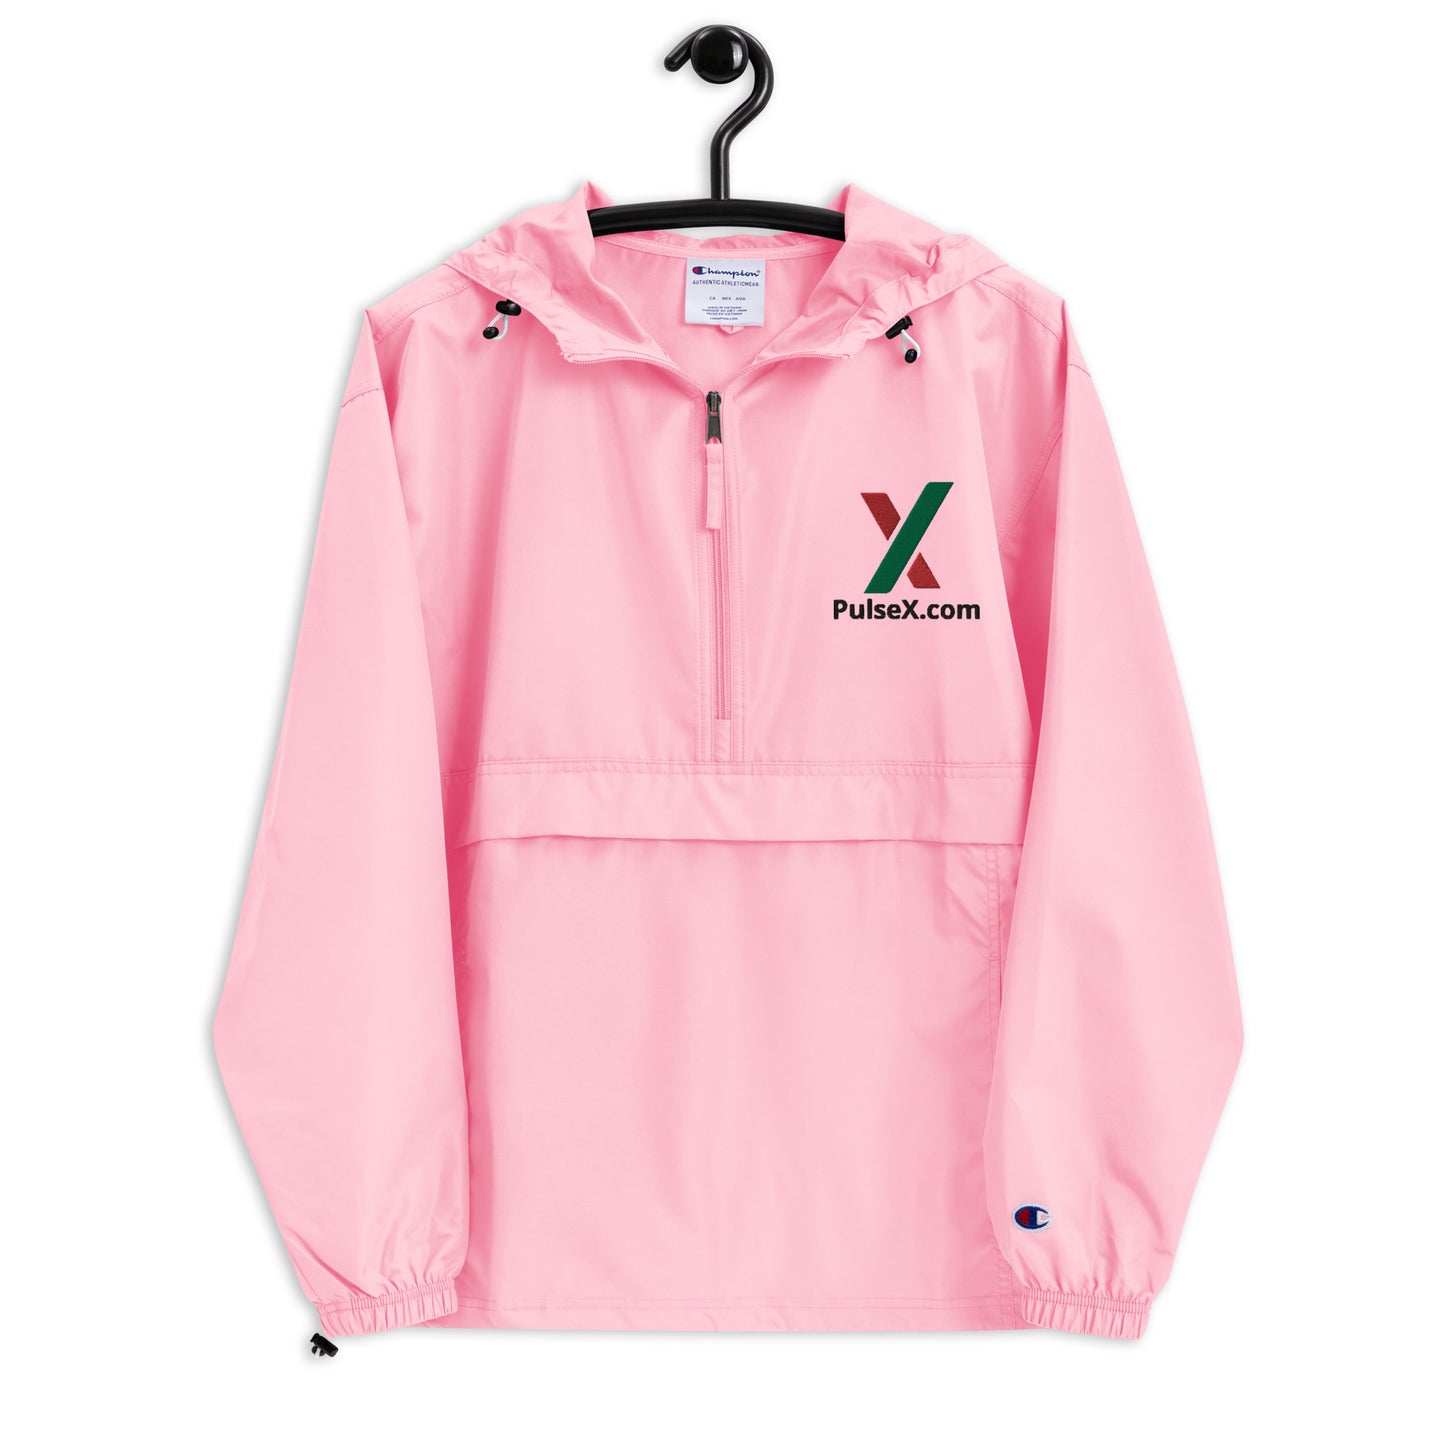 PulseX.com Embroidered Packable Jacket